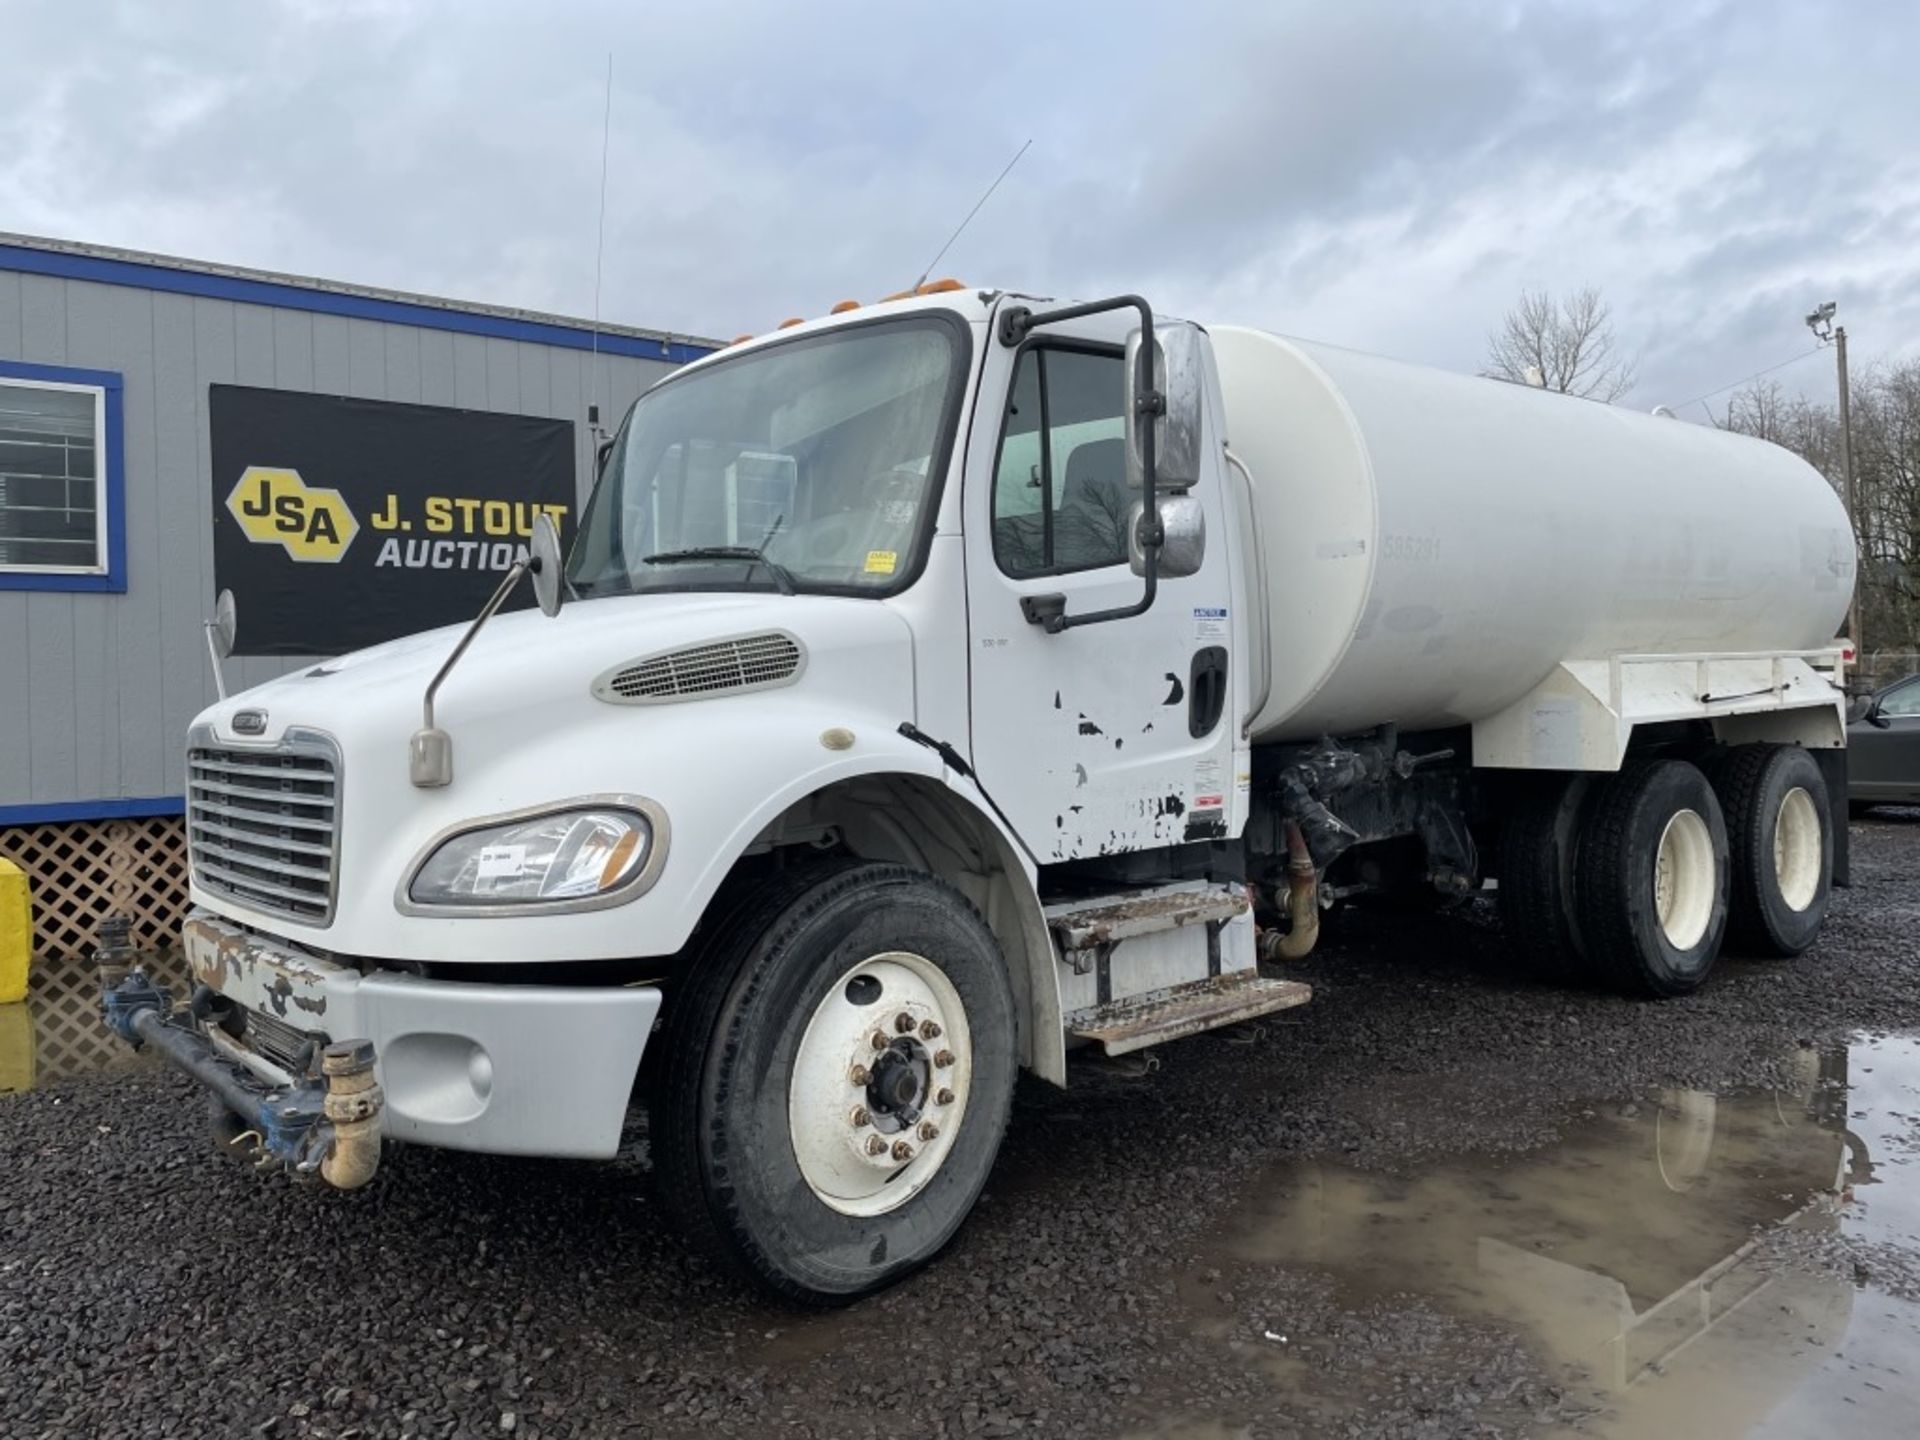 2006 Freightliner M2 Business Class Water Truck - Image 9 of 28